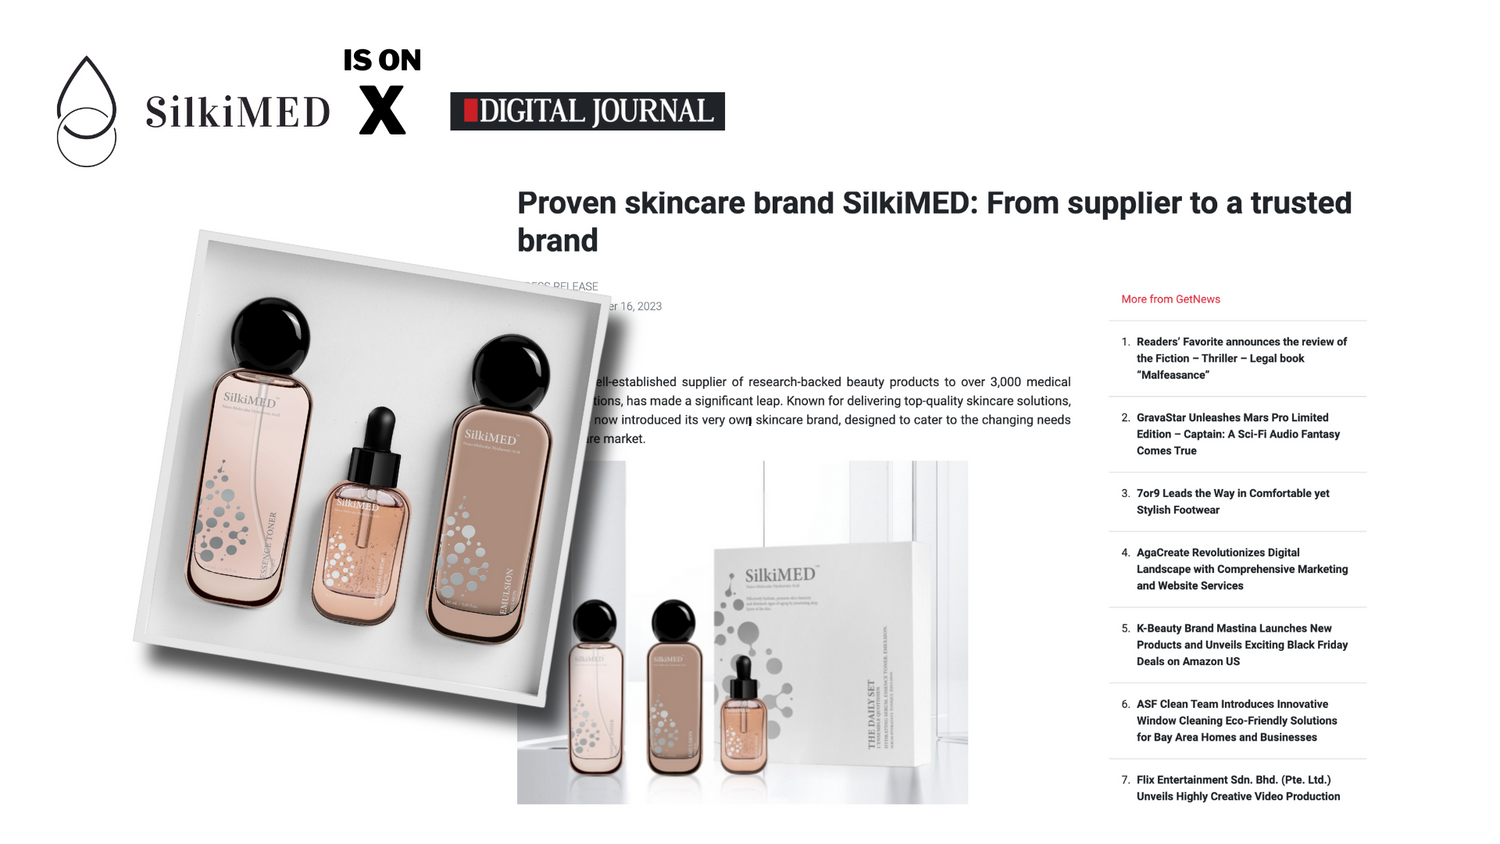 Digital Journal - Proven skincare brand SilkiMED: From supplier to a trusted brand